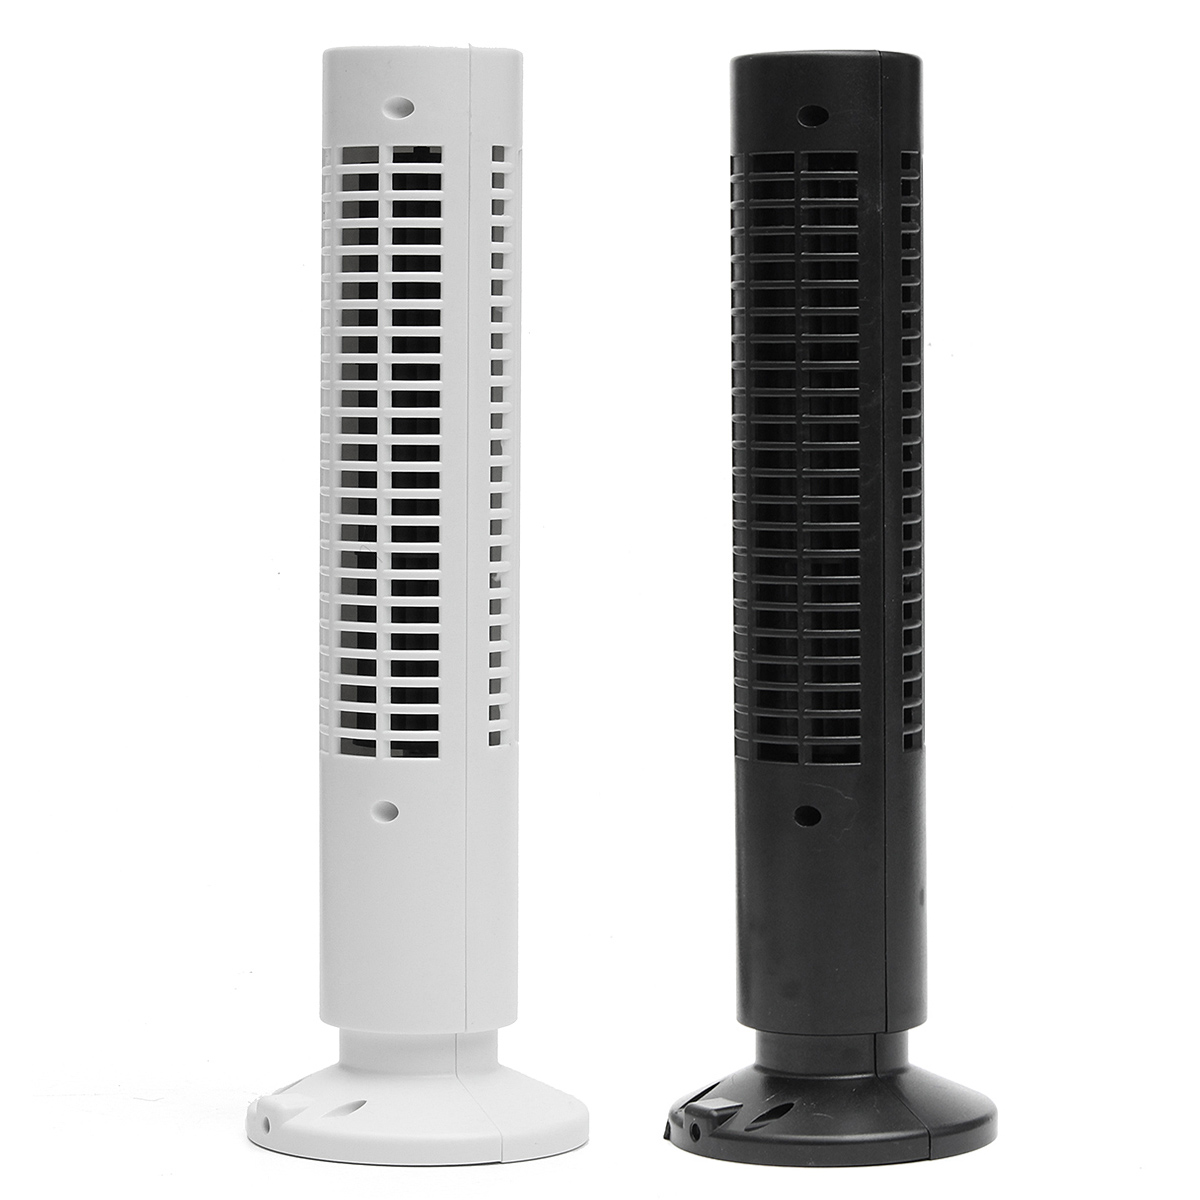 

5V 2.5W Mini Portable USB Cooling Air Conditioner Purifier Tower Bladeless Desk Fan